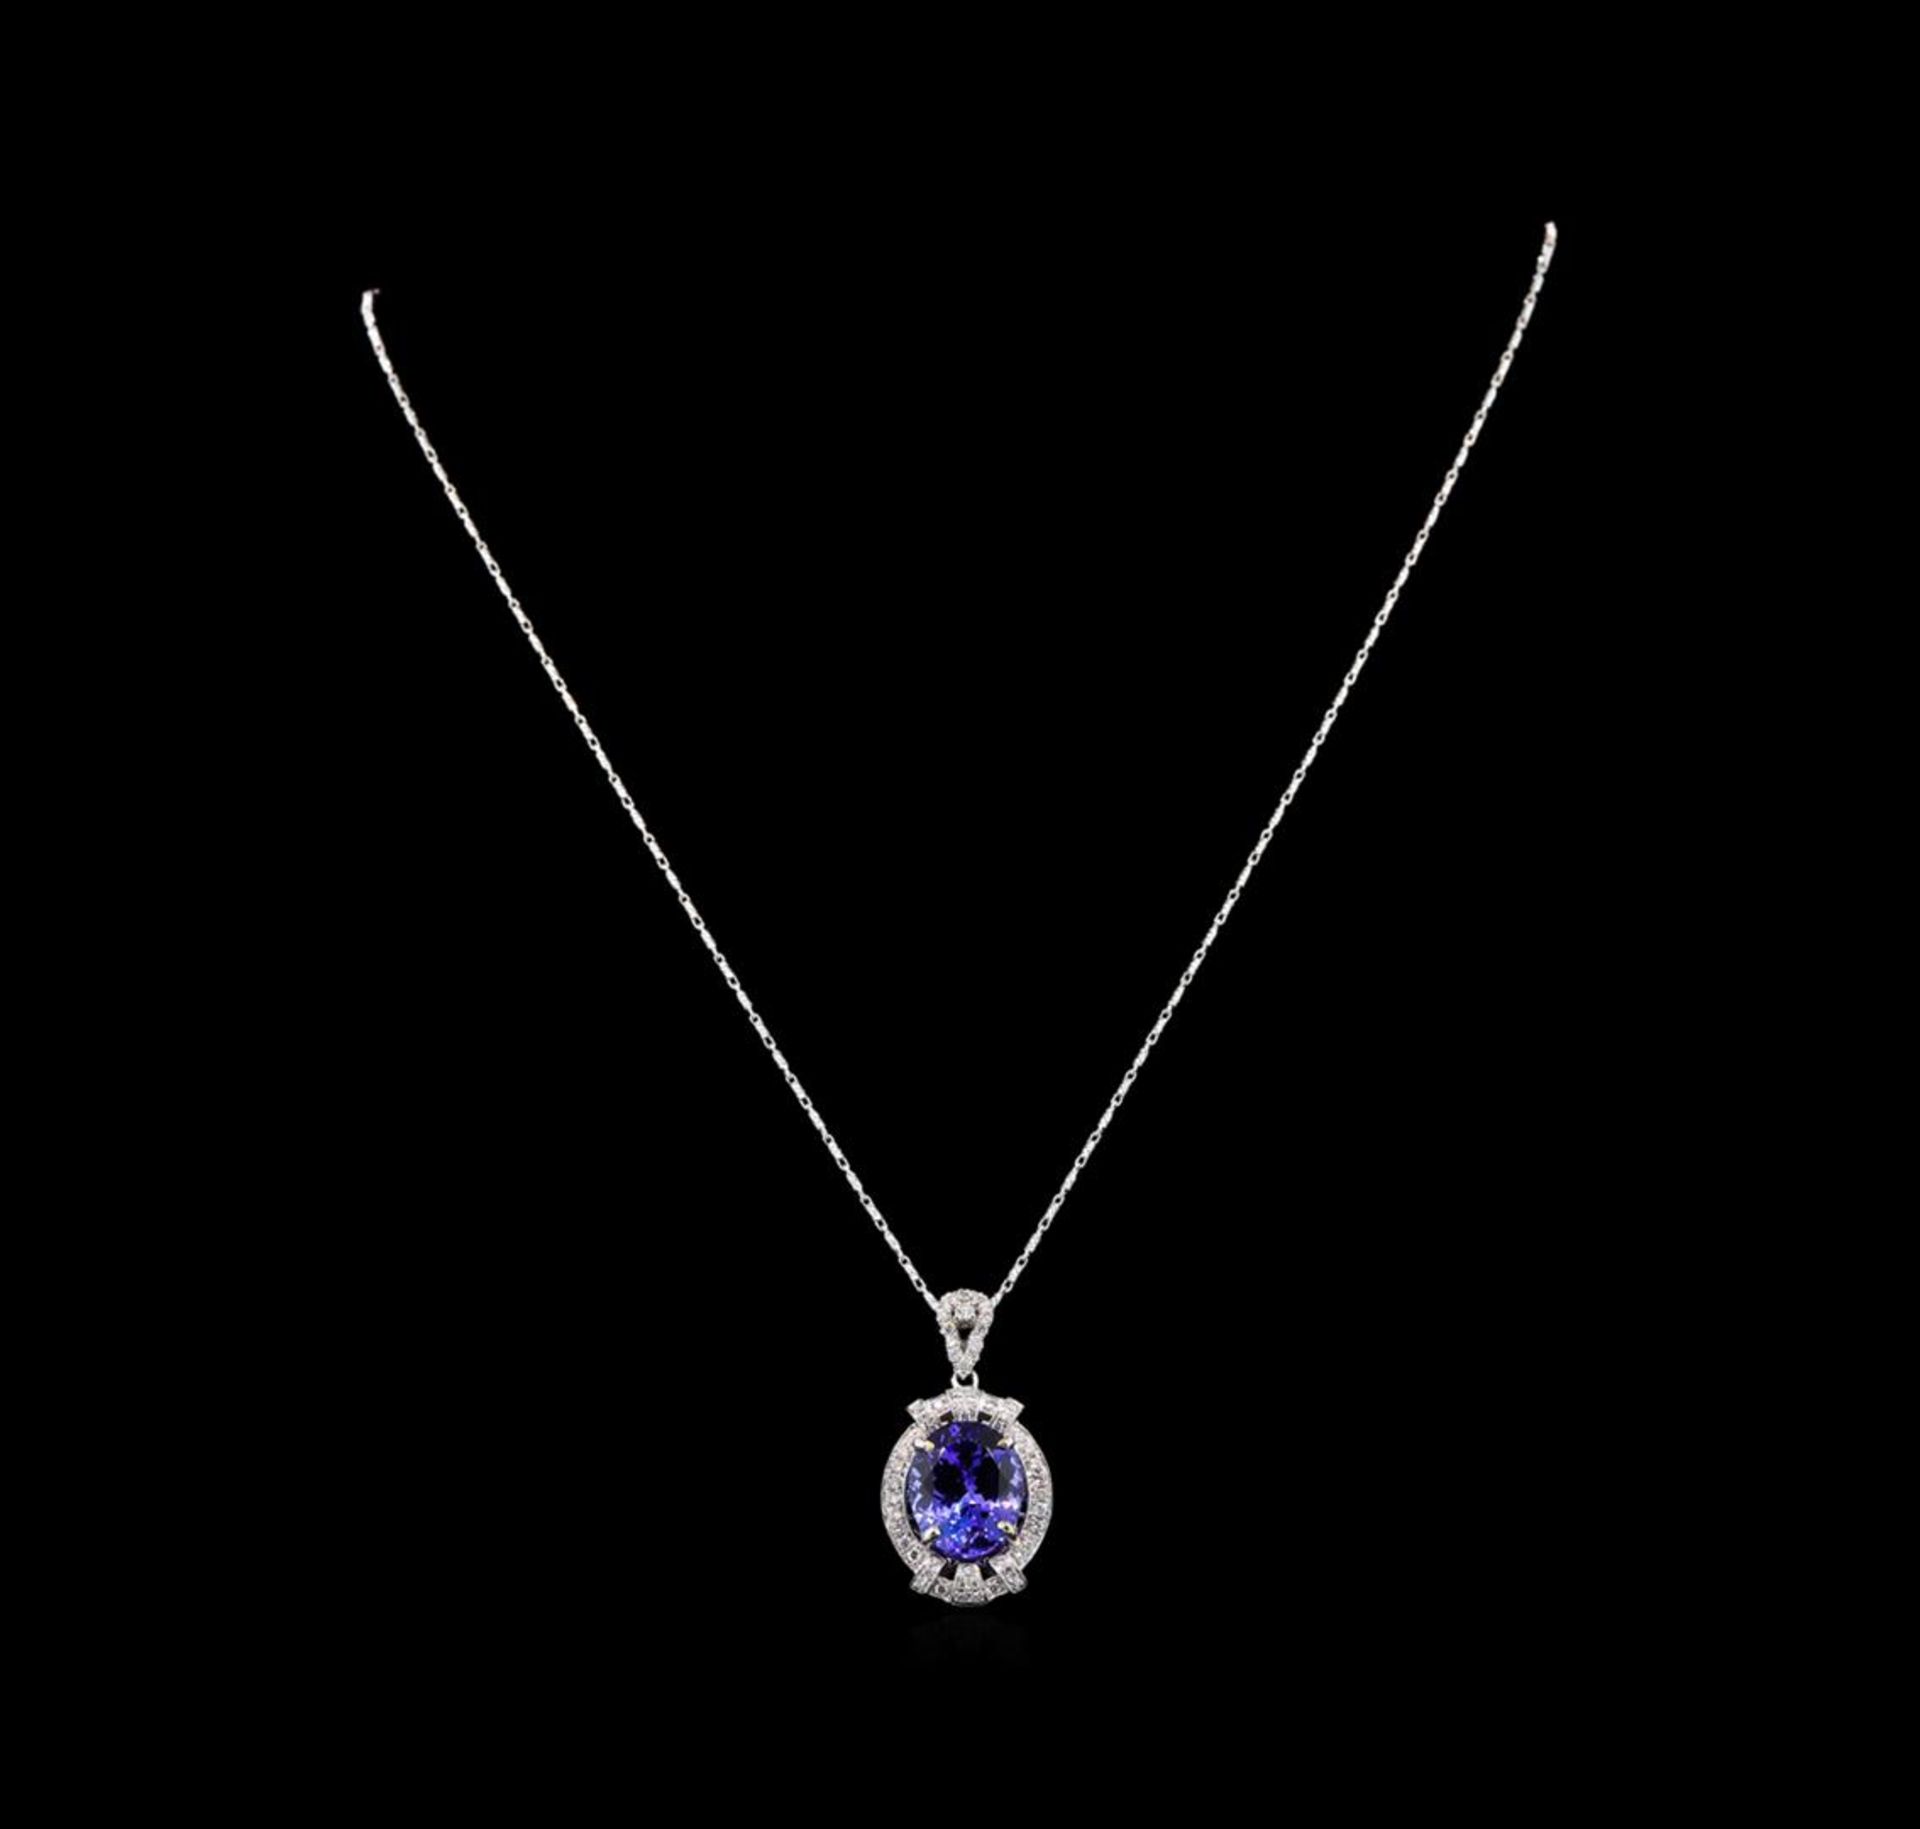 18KT White Gold 6.20 ctw Tanzanite and Diamond Pendant With Chain - Image 2 of 4